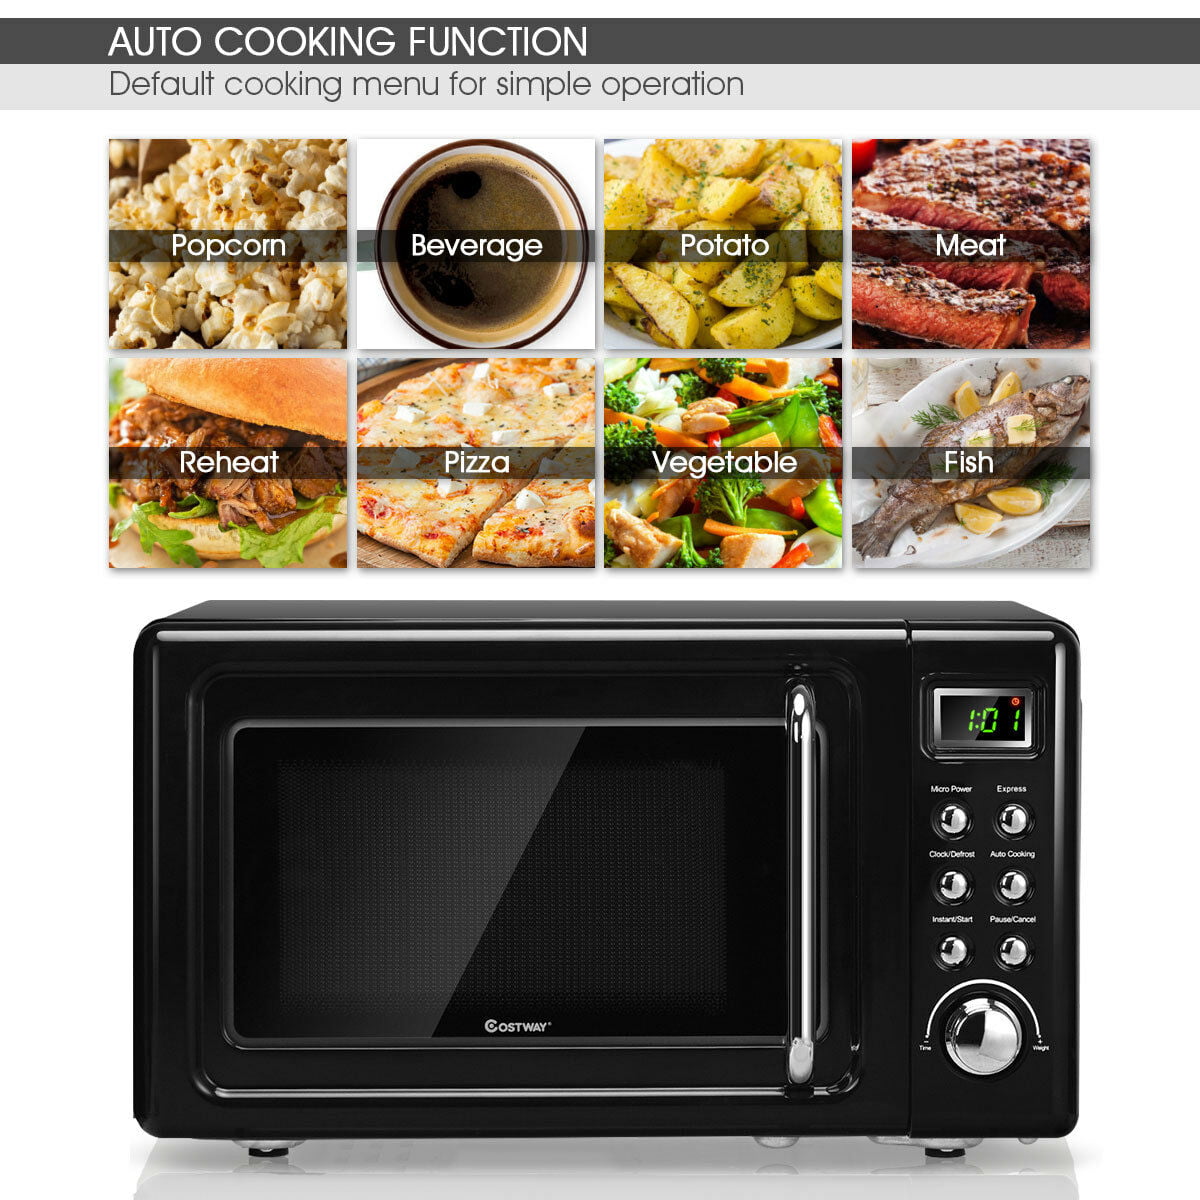 LDAILY Mo-23853-EP Moccha compact Retro Microwave Oven, 07cuft, 700-Watt countertop  Microwave Ovens w5 Micro Power, Delayed Start Function, LED Dis